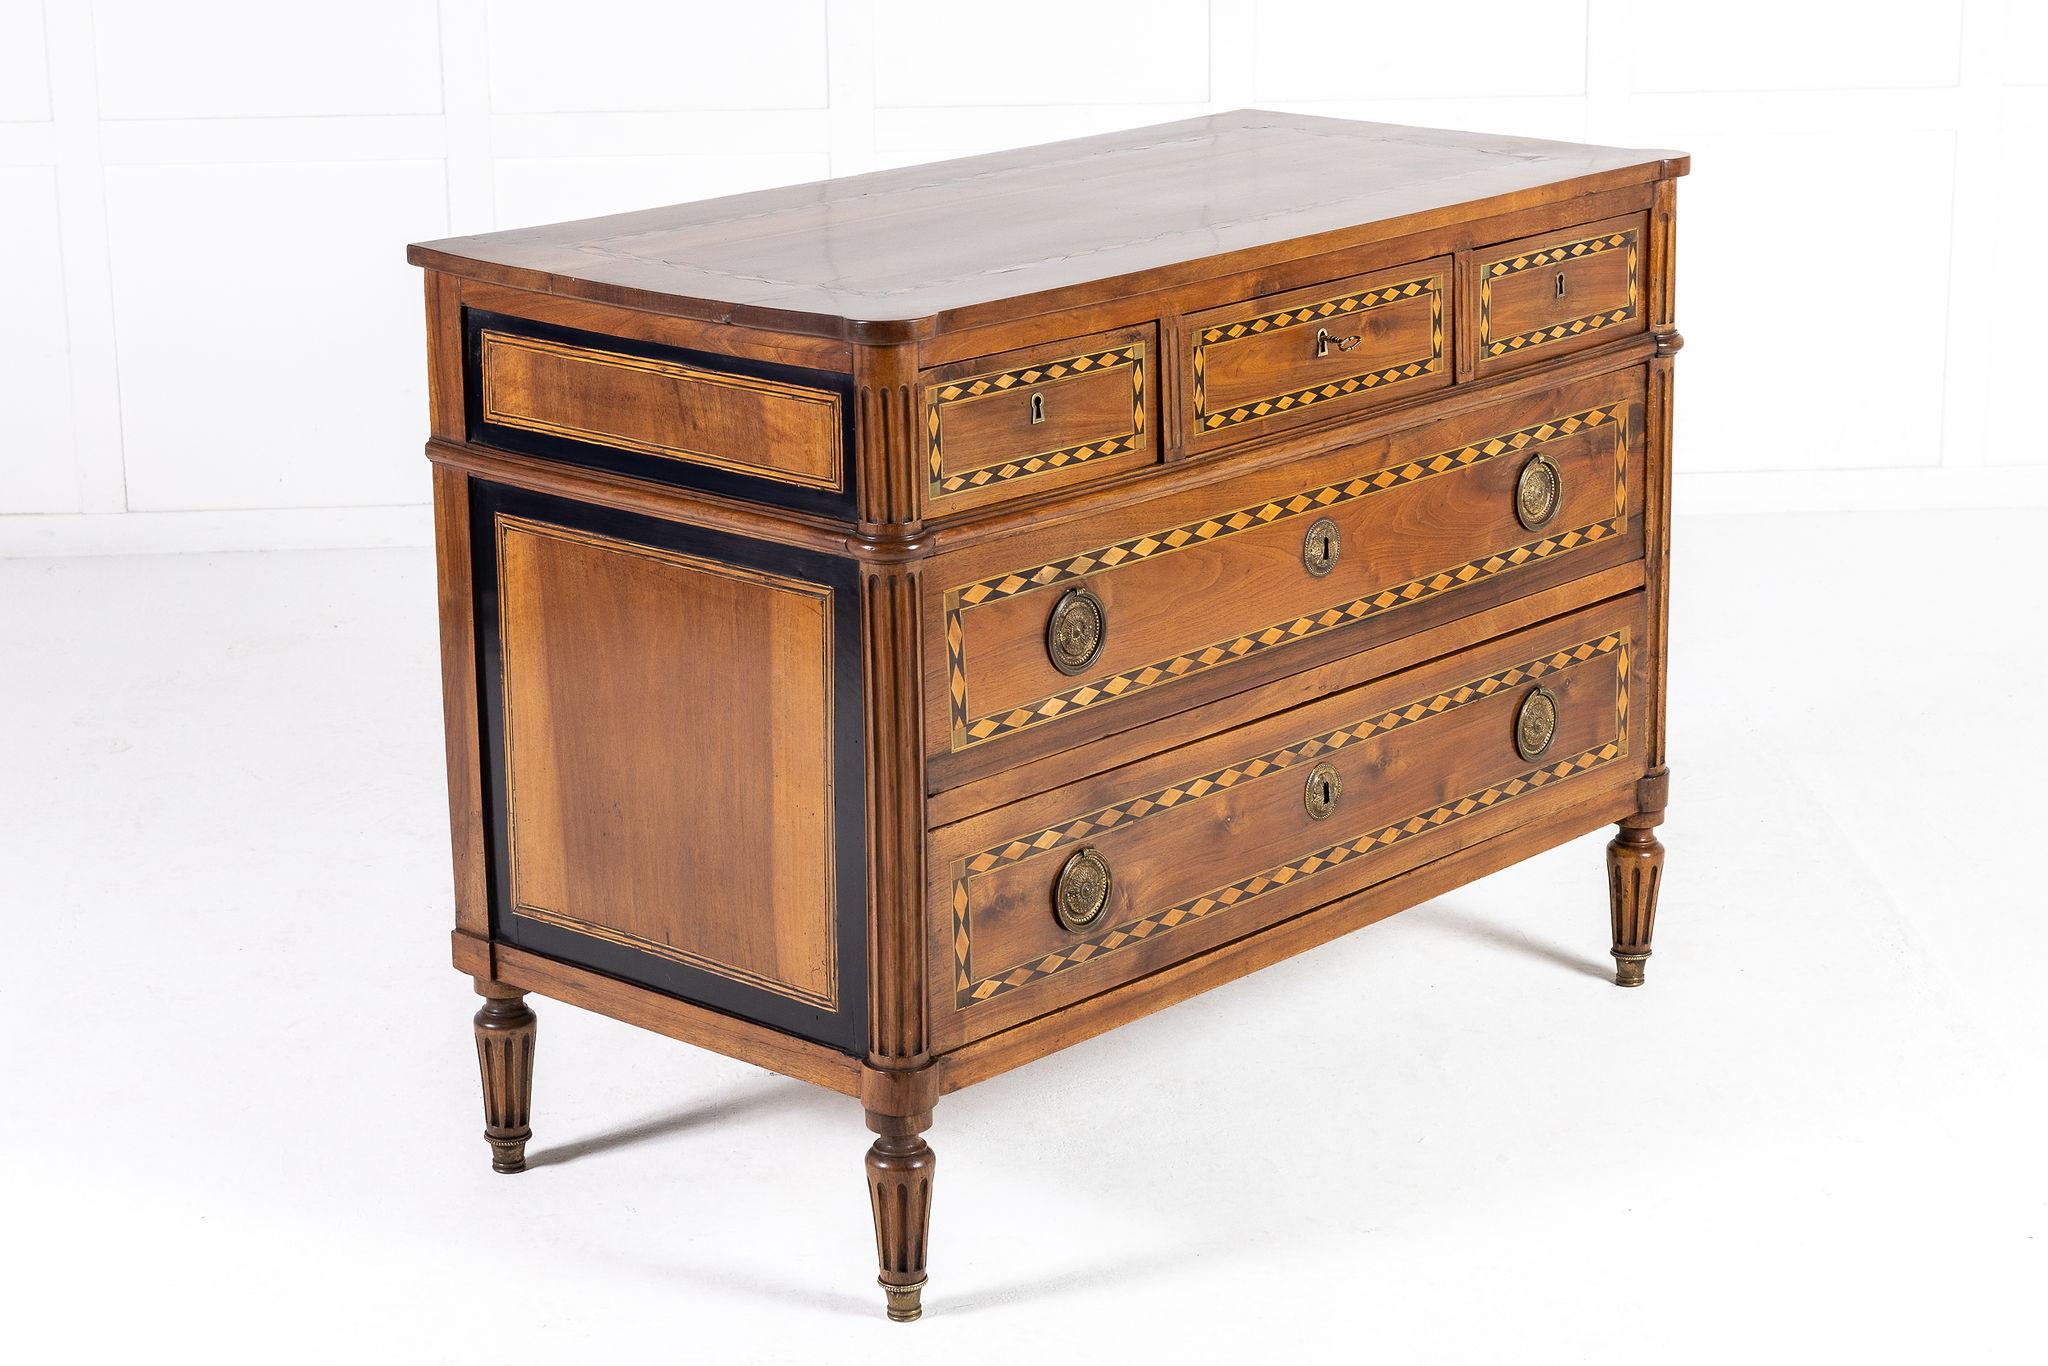 Late 18th Century French Inlaid Walnut Commode For Sale 2